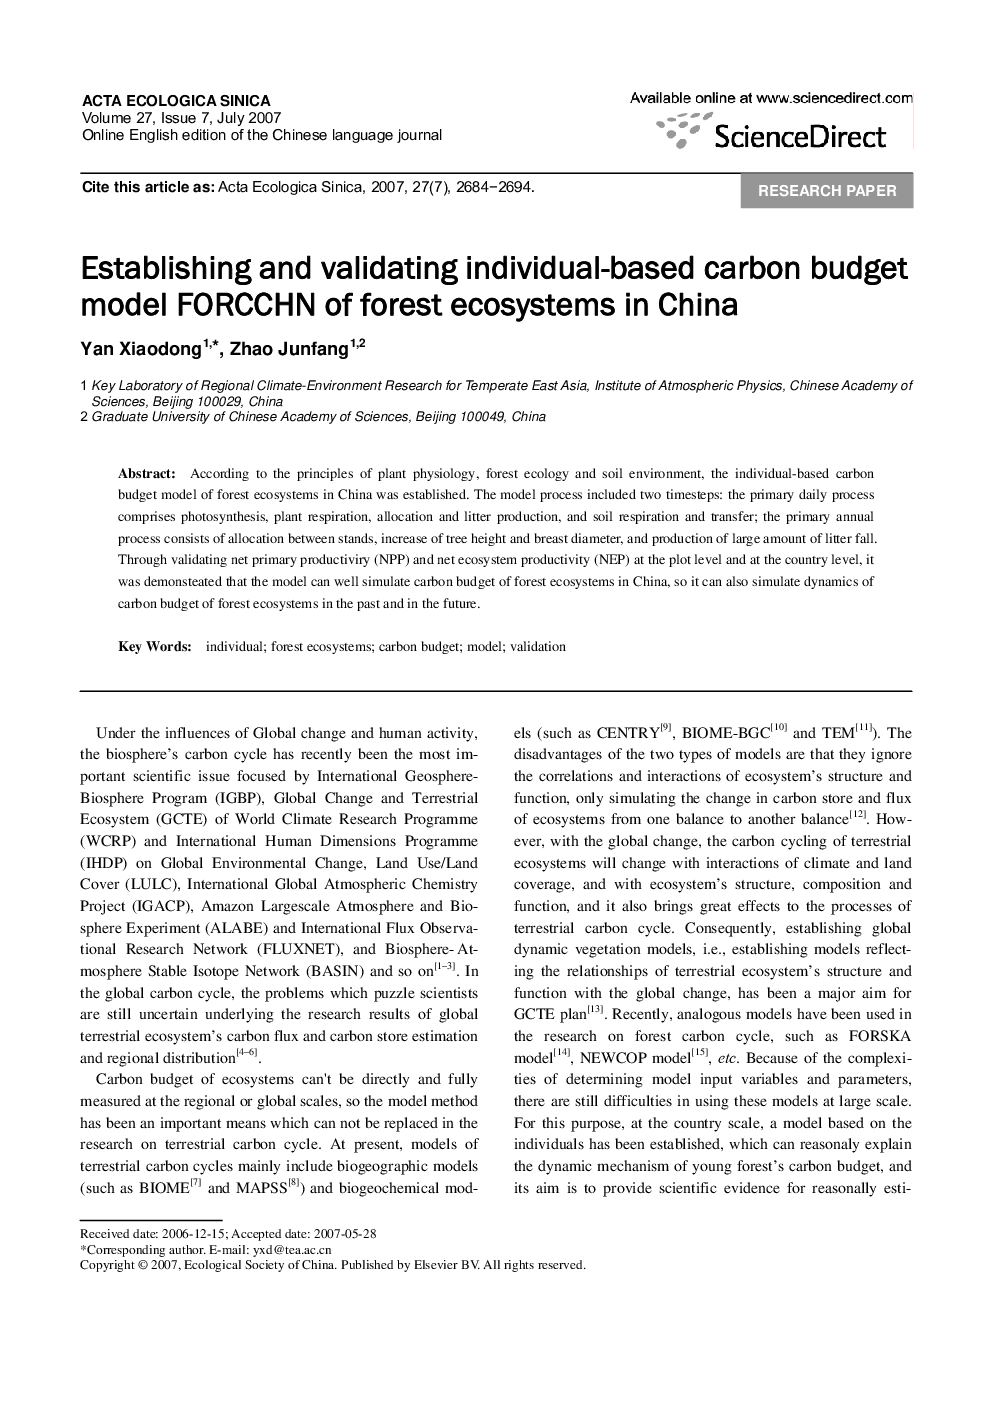 Establishing and validating individual-based carbon budget model FORCCHN of forest ecosystems in China